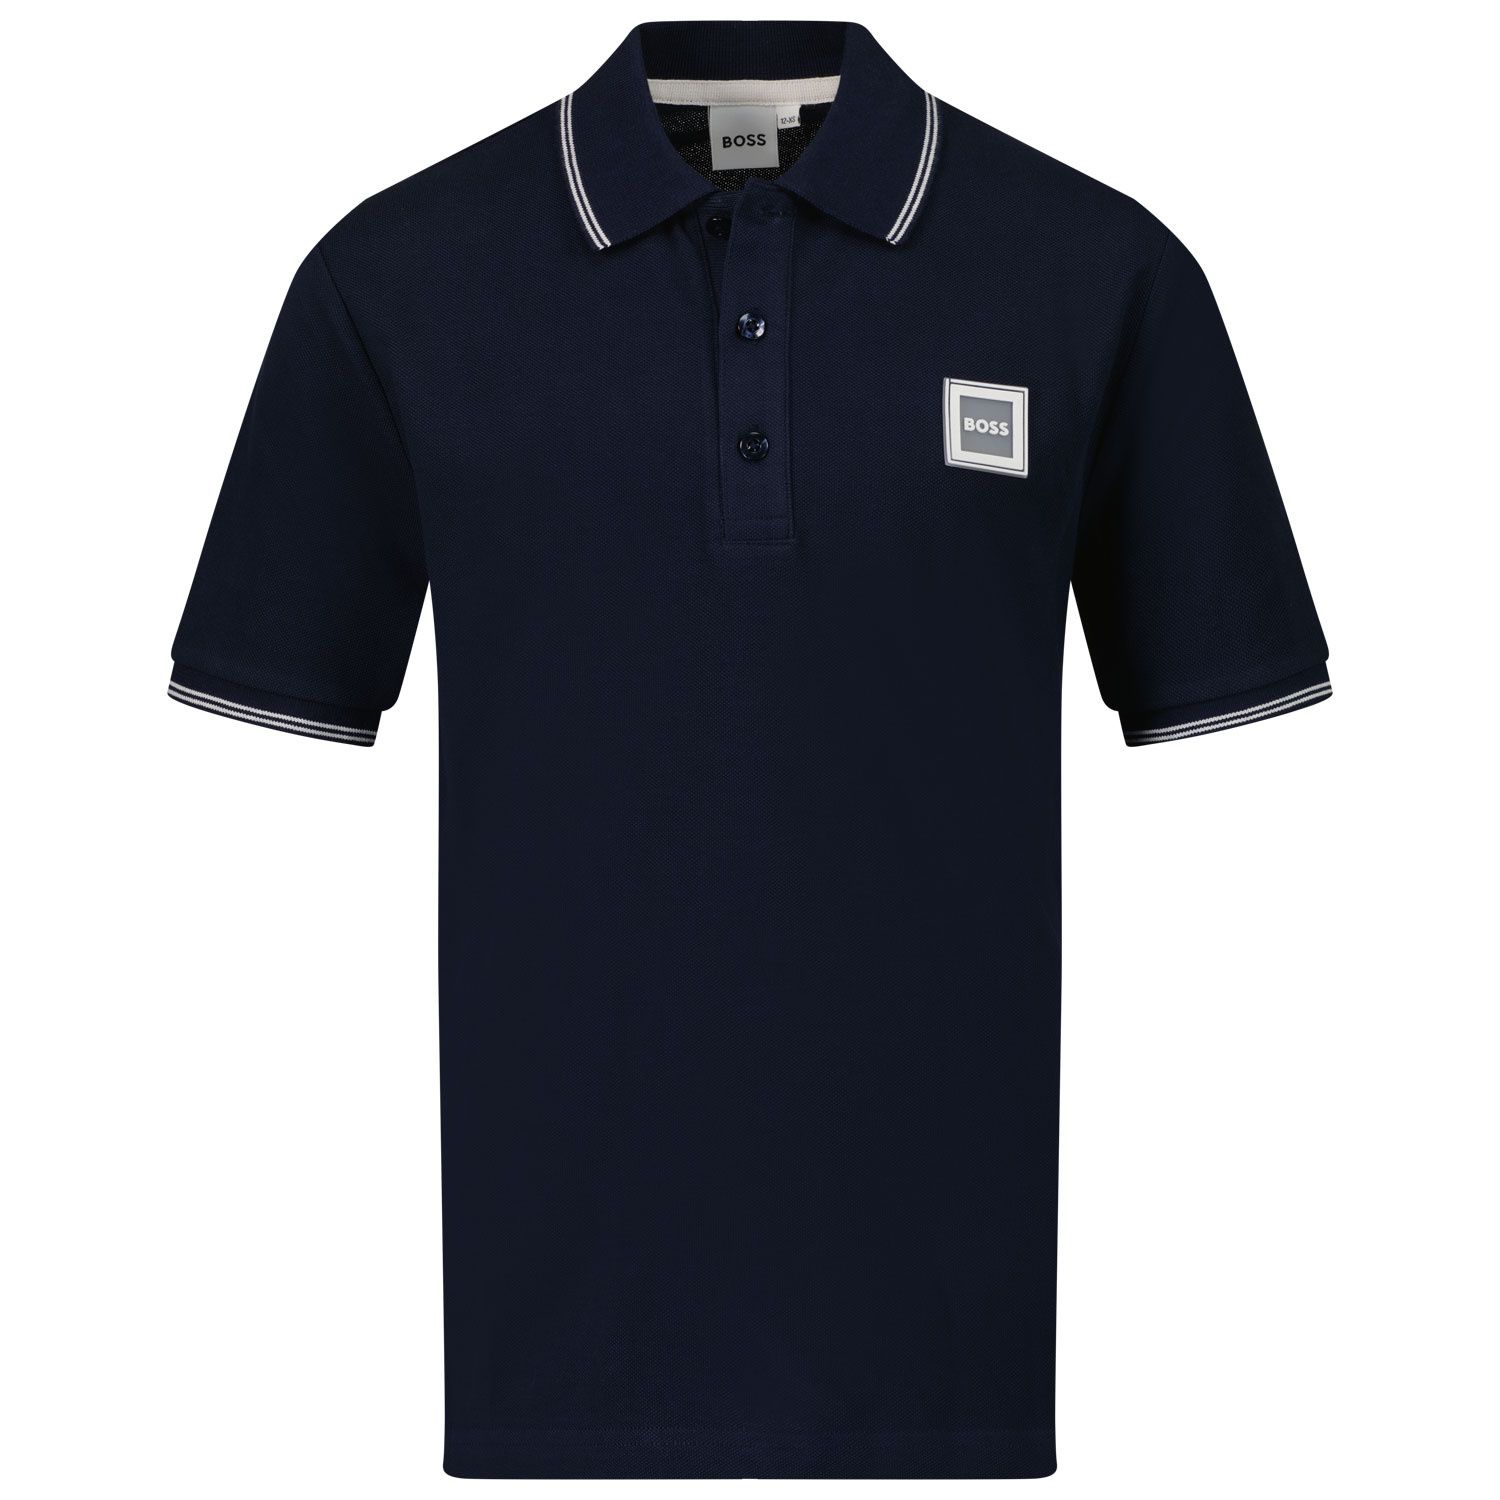 Picture of Boss J25N50 kids polo shirt navy